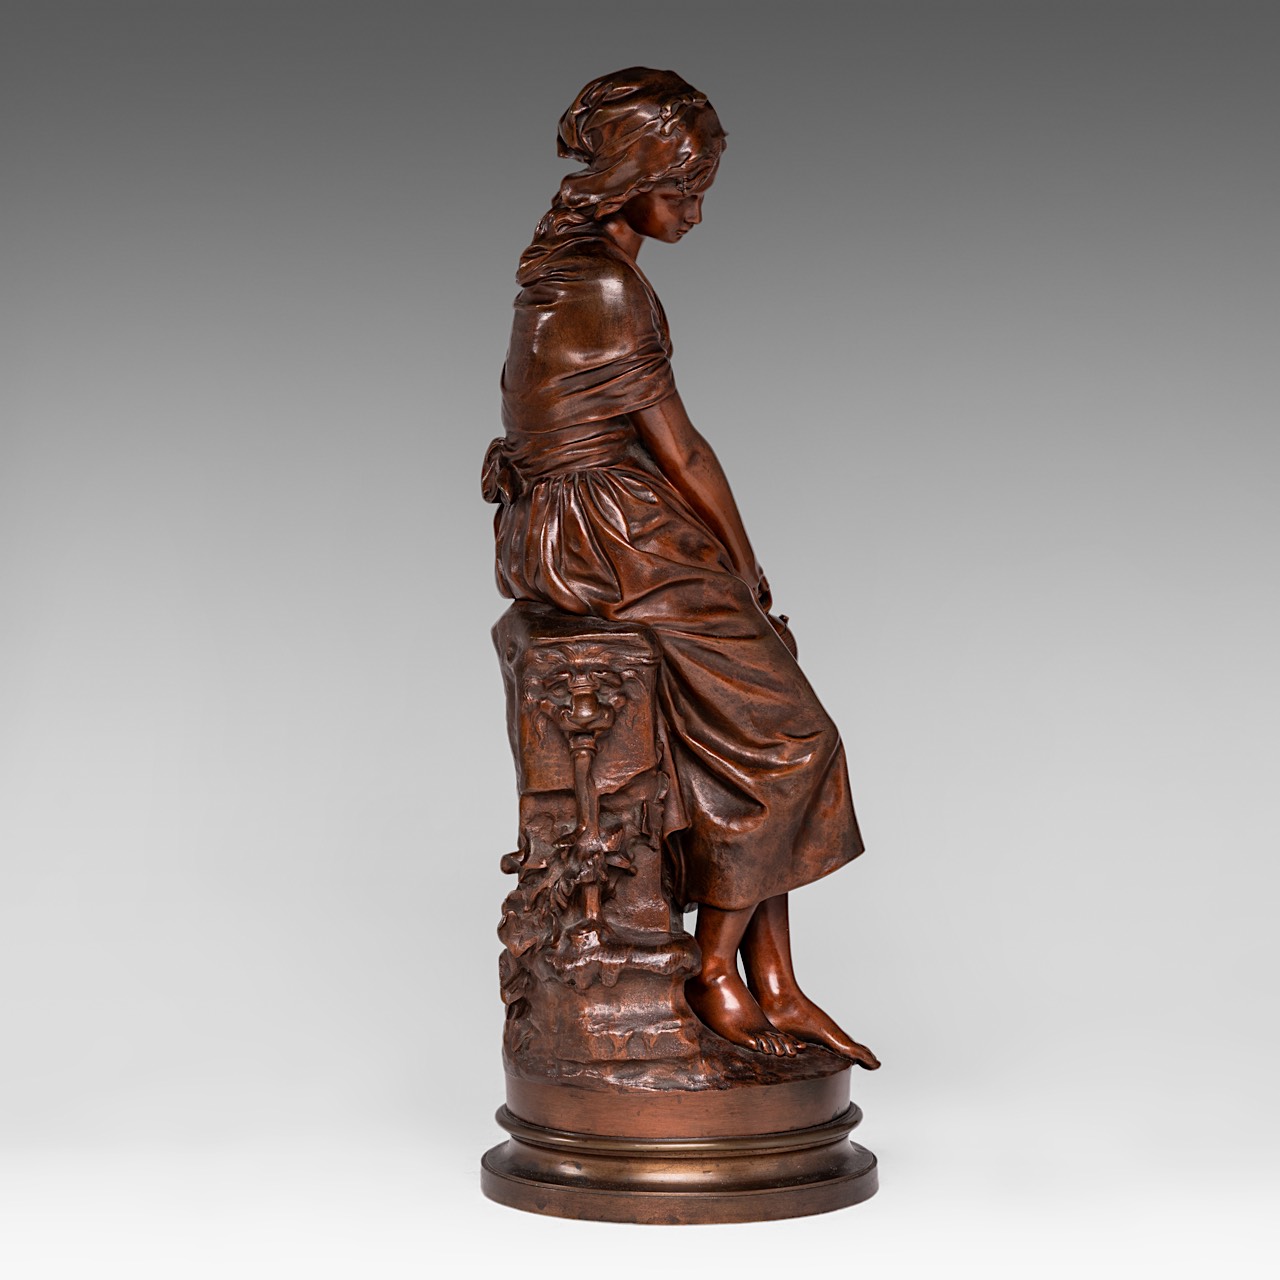 Mathurin Moreau (1822-1912), young girl with a jug, patinated bronze, foundry mark of E. Godeau, Par - Image 5 of 8